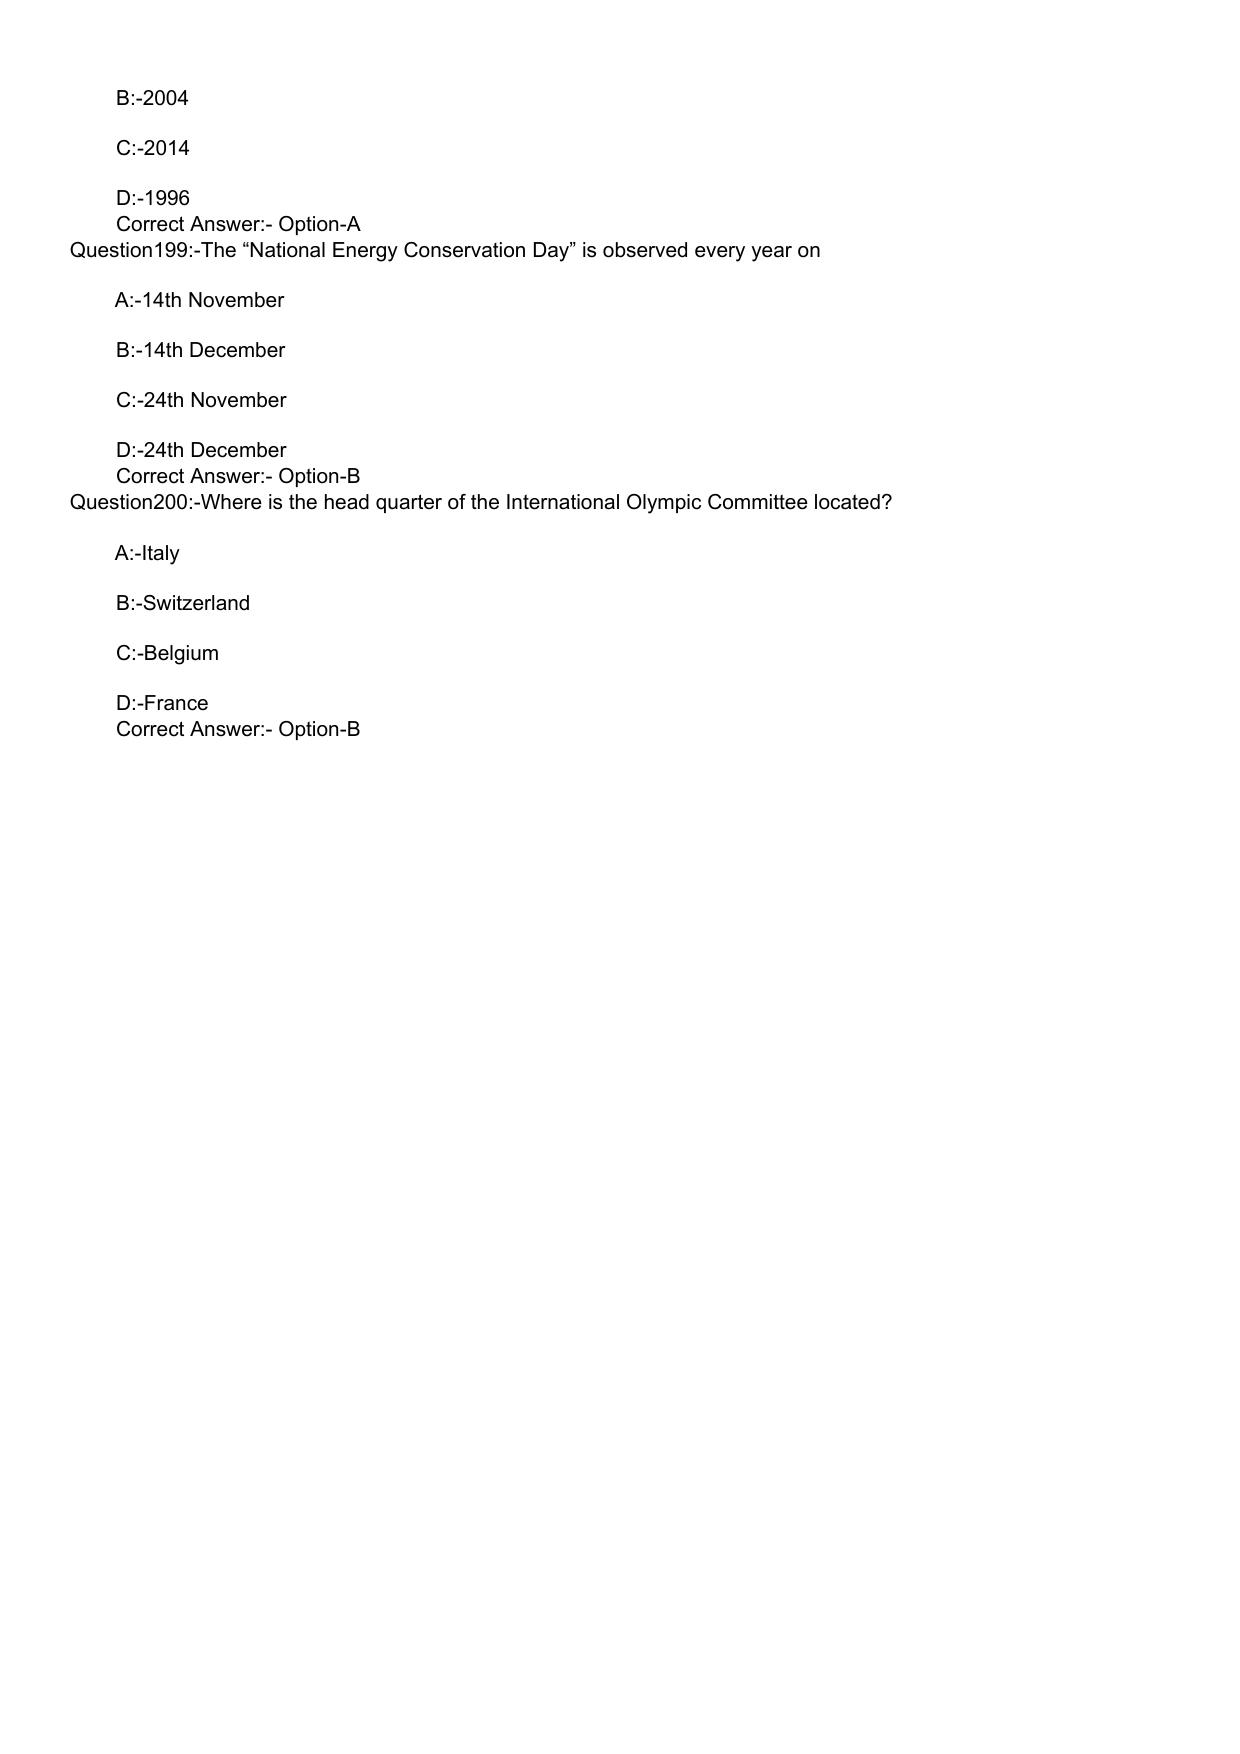 KLEE 5 Year LLB Exam 2020 Question Paper - Page 34